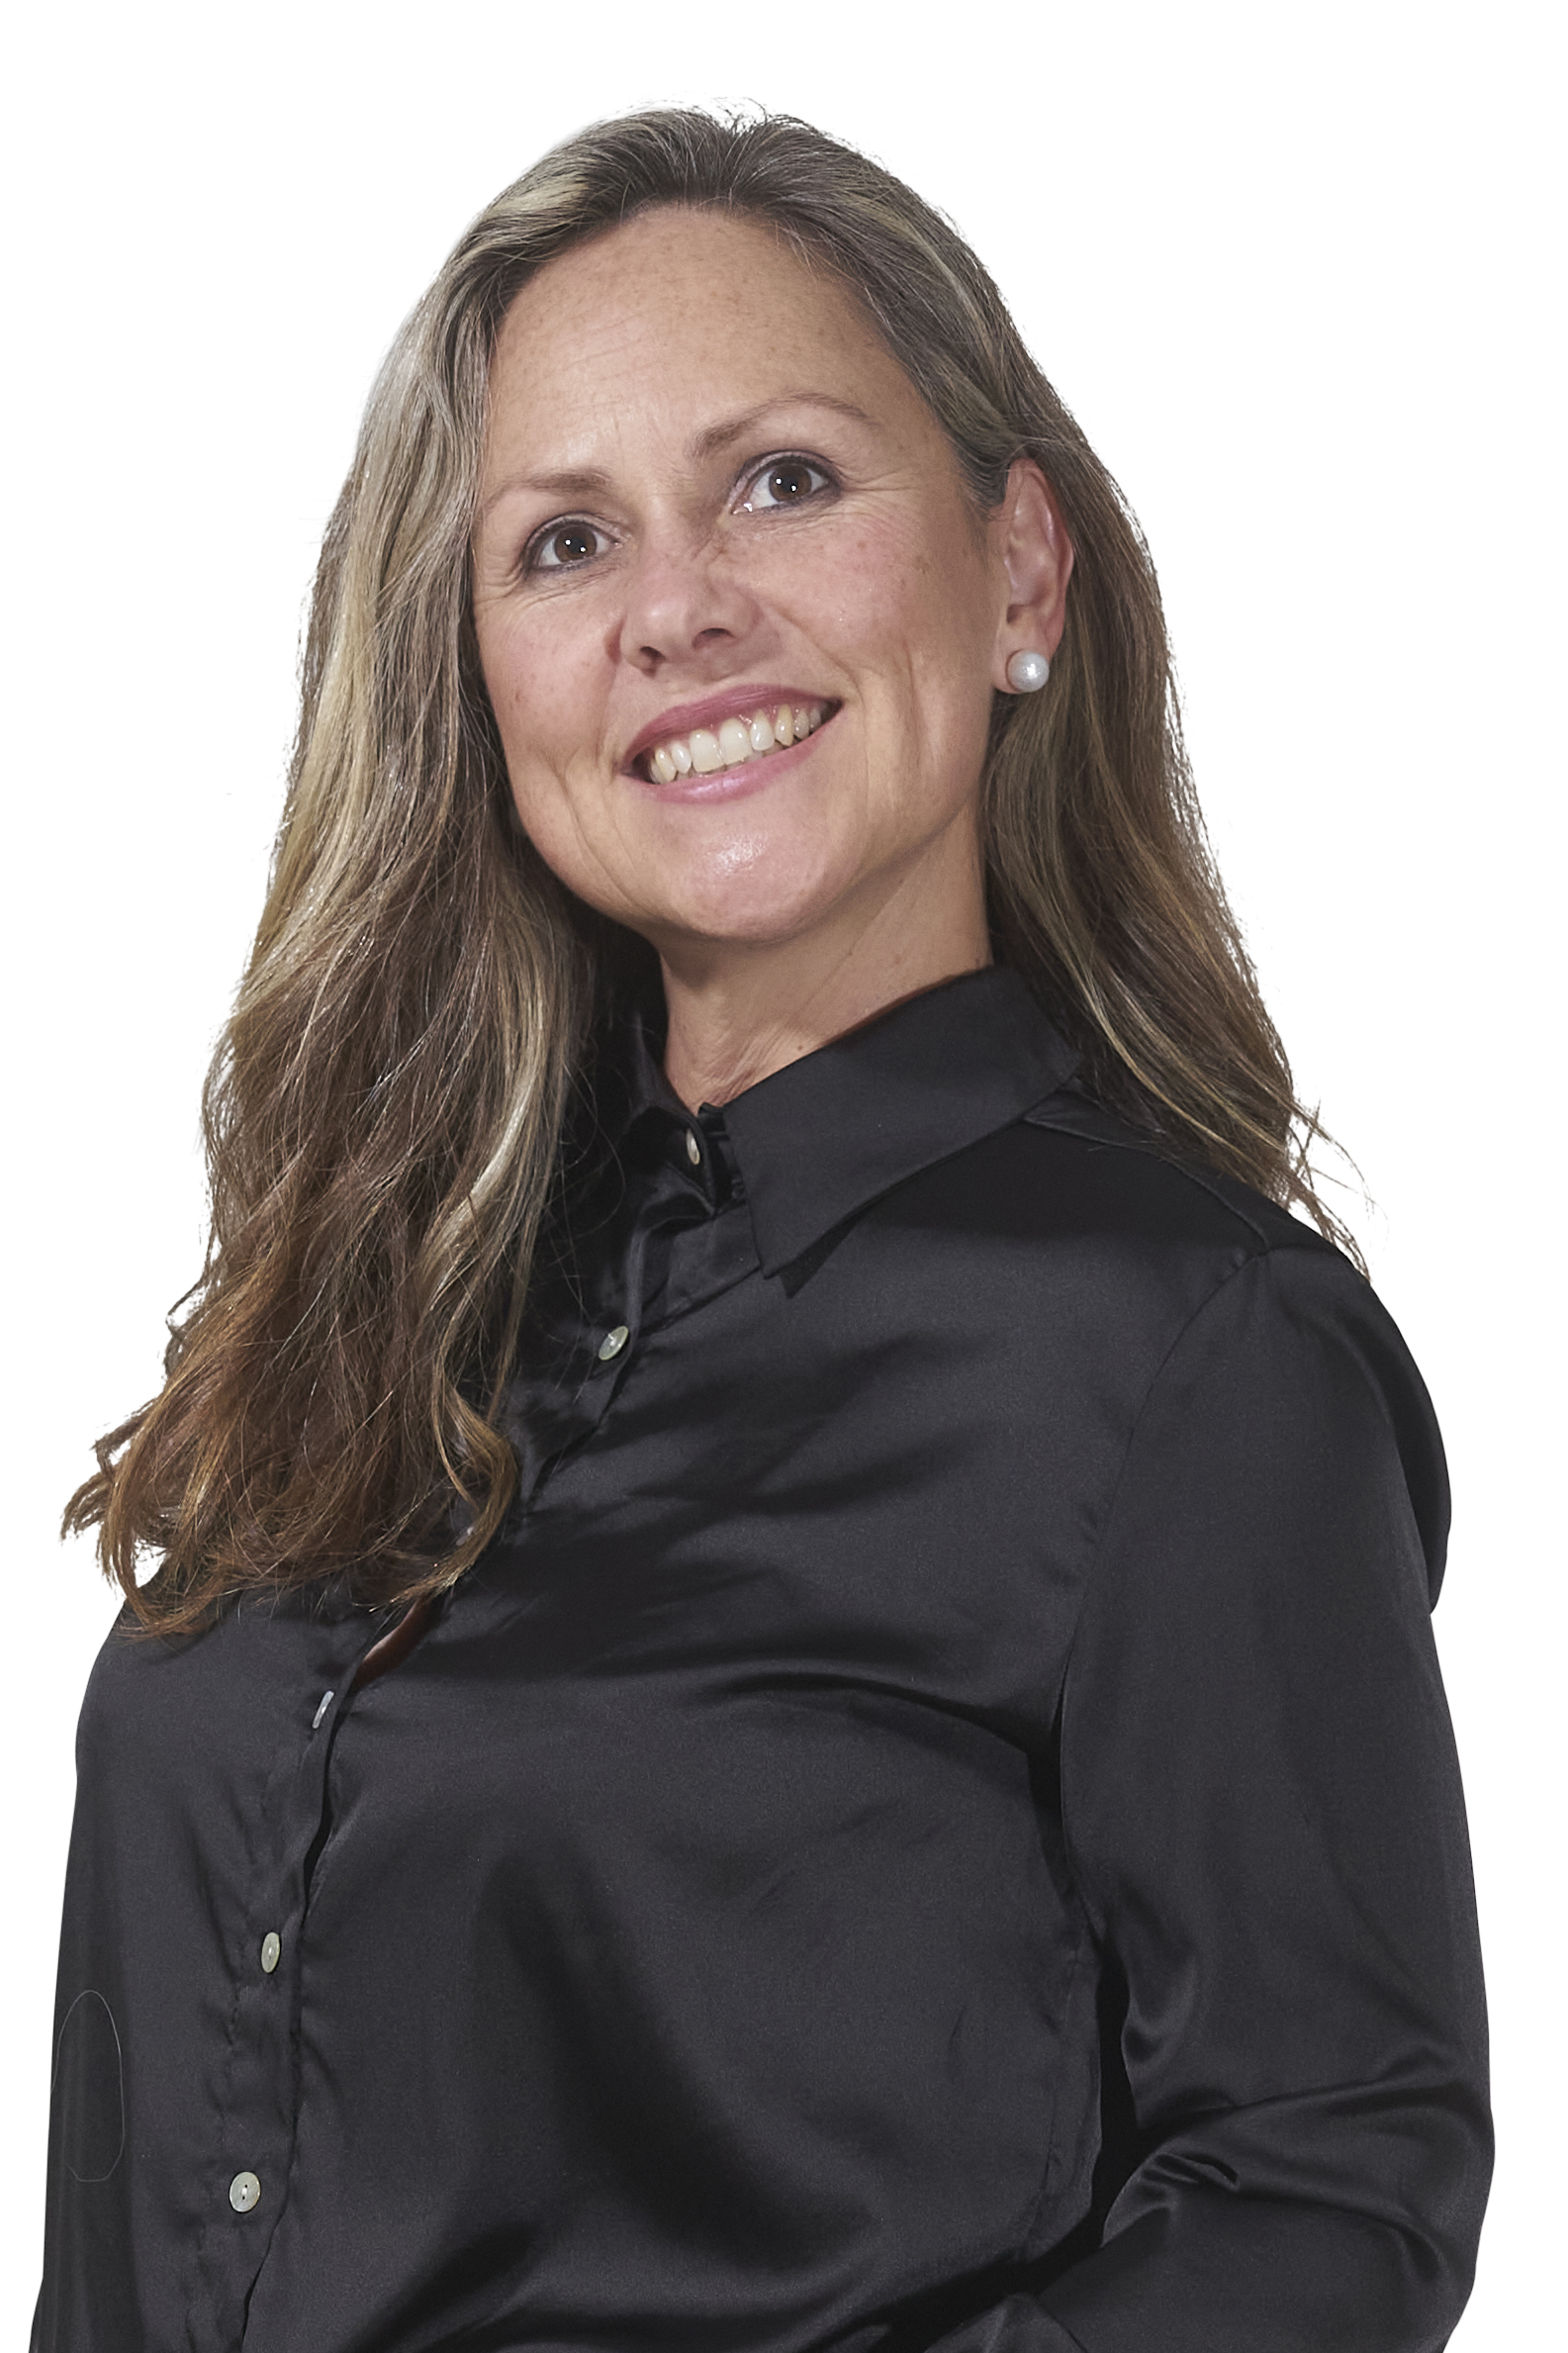 A photo of Ruth Fitzclarence, Media and Communications Officer for the Mine Land Rehabilitation Authority. Ruth is wearing a black shirt and is smiling.